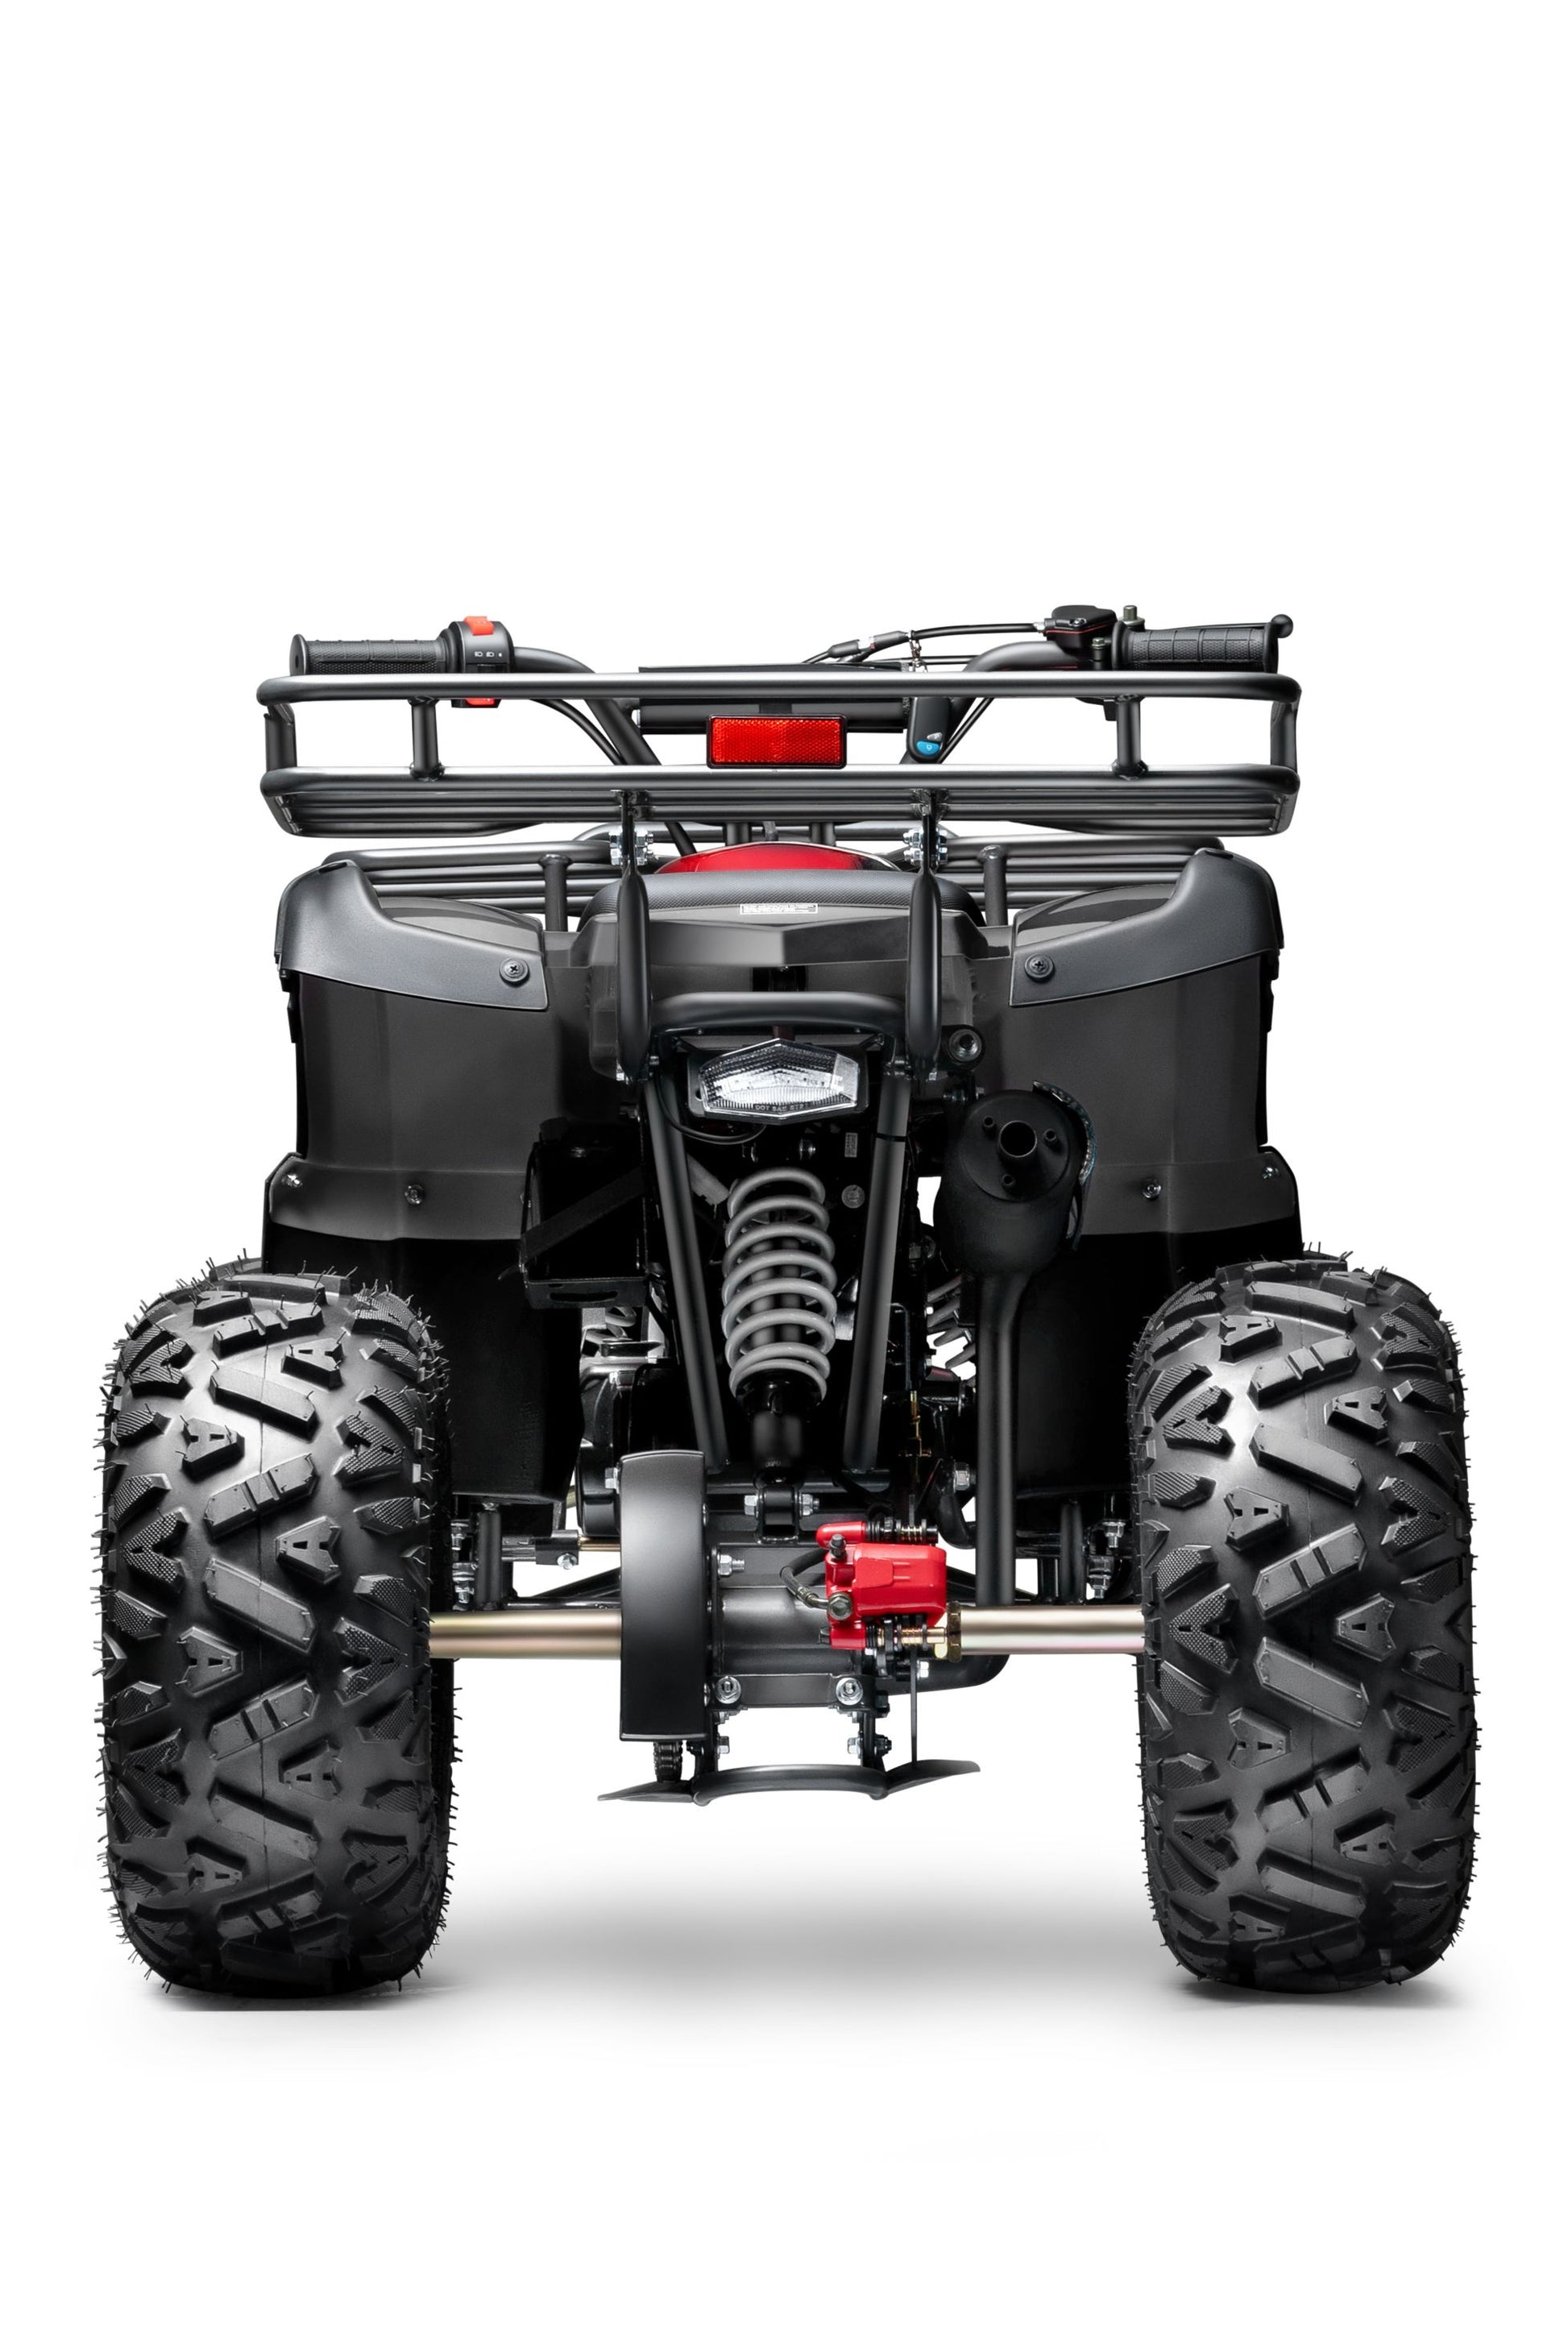 GAS 125cc ATV Quad 4 Wheeler with Off-Road Tires - 220lbs Weight Capac –  Seangles